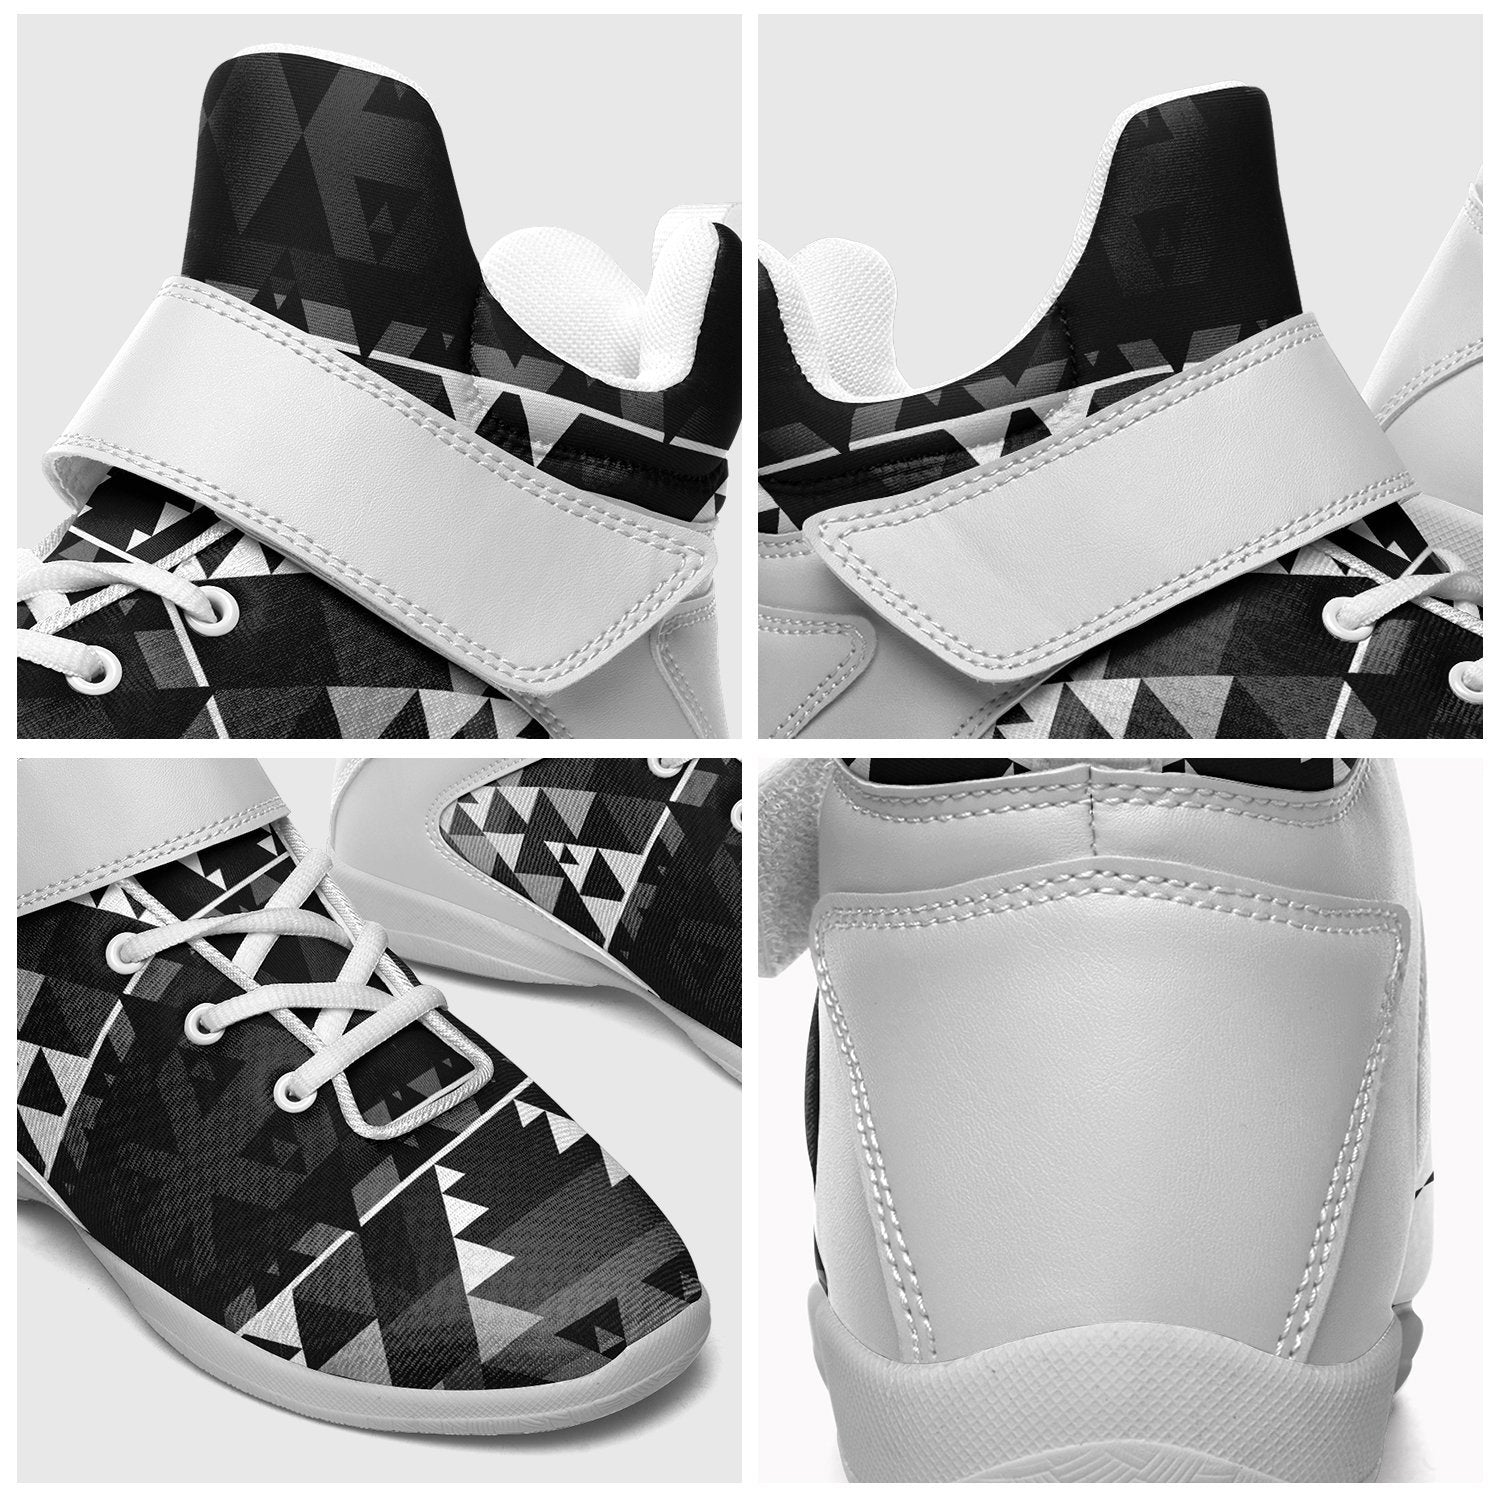 Writing on Stone Black and White Ipottaa Basketball / Sport High Top Shoes - White Sole 49 Dzine 